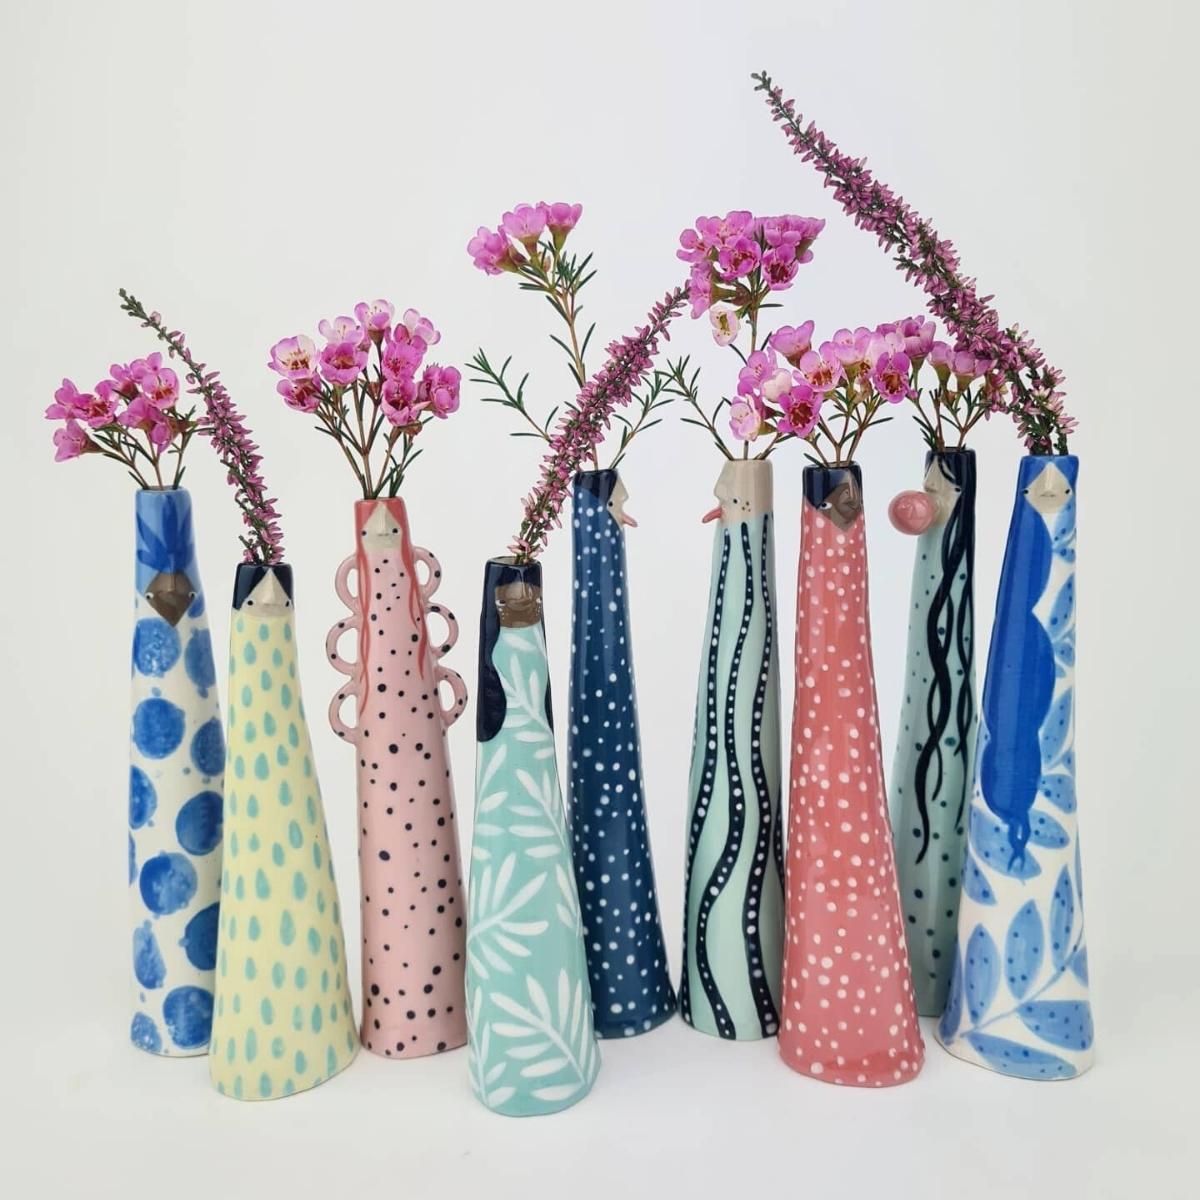 quirky-faces-and-patterns-adorn-sandra-apperloos-bud-vases-featured